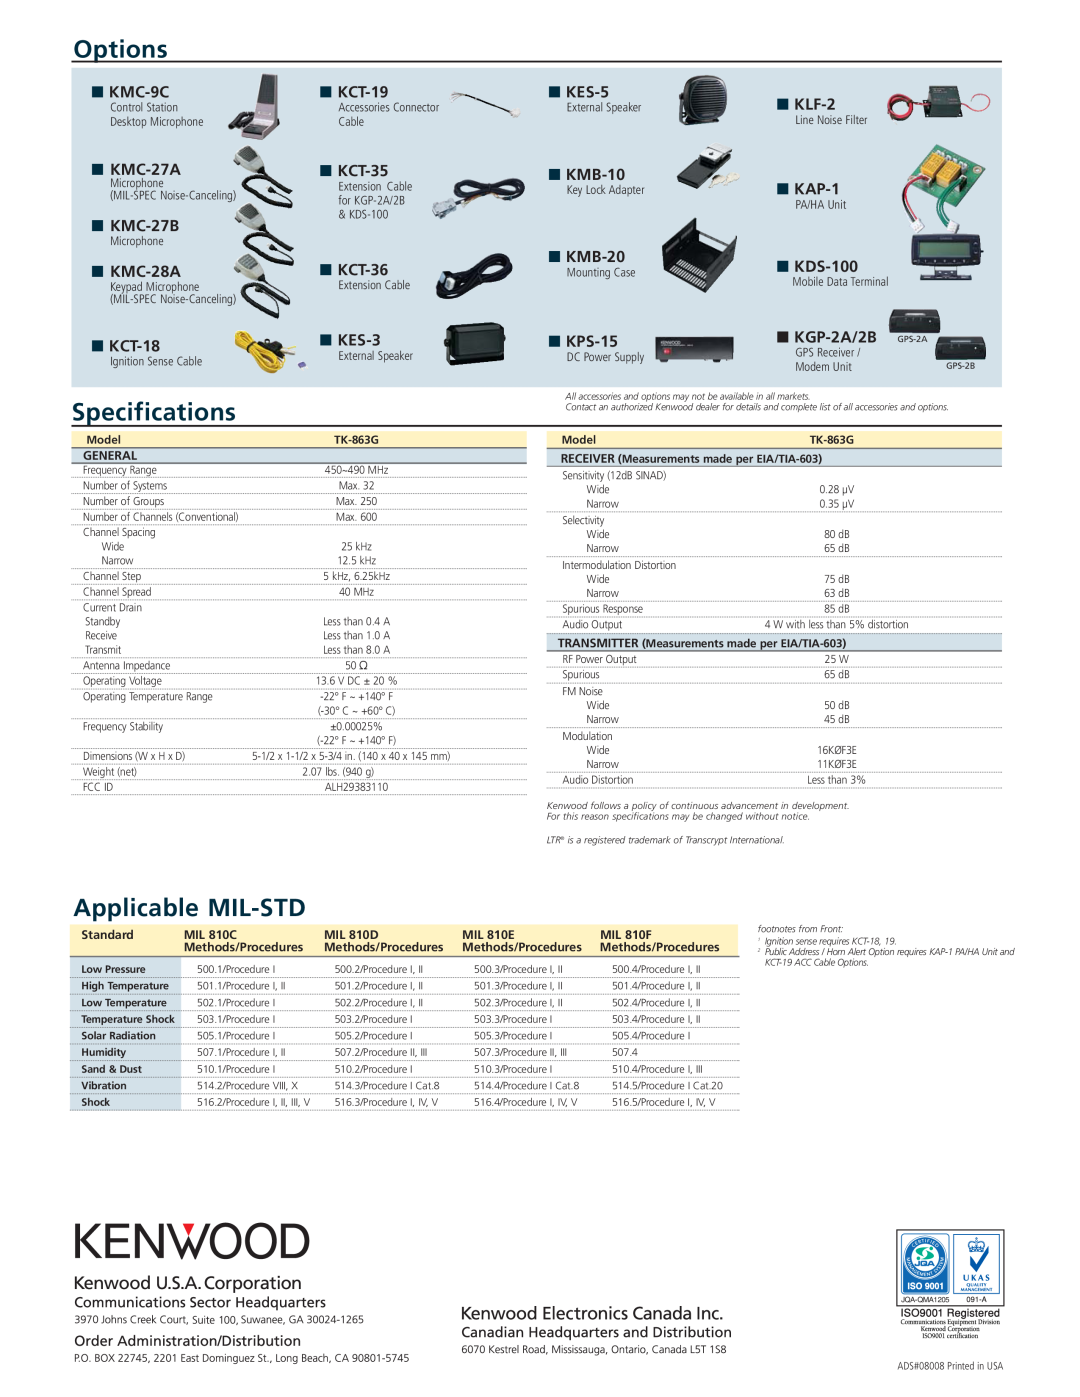 Kenwood TK-863G manual Options, Specifications, Applicable MIL-STD 